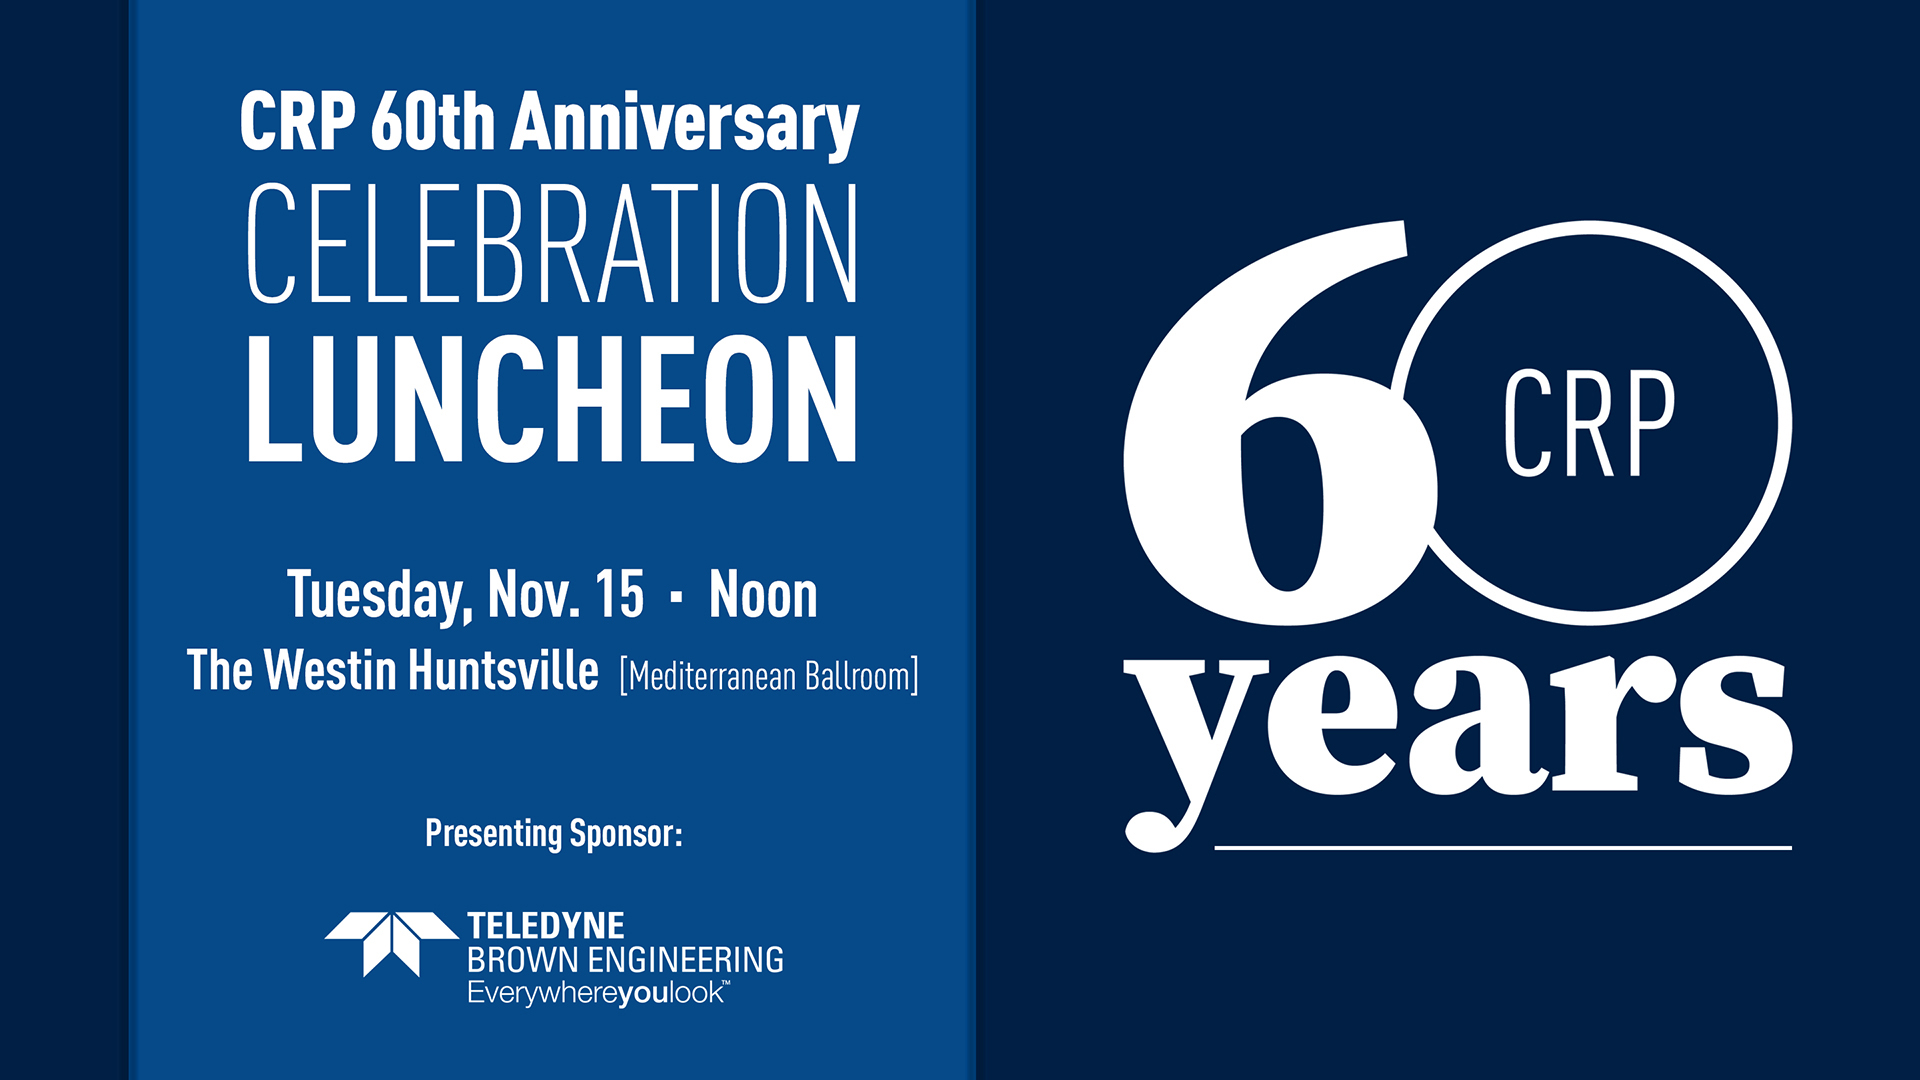 CRP 60th Anniversary Celebration Luncheon – Cummings Research Park